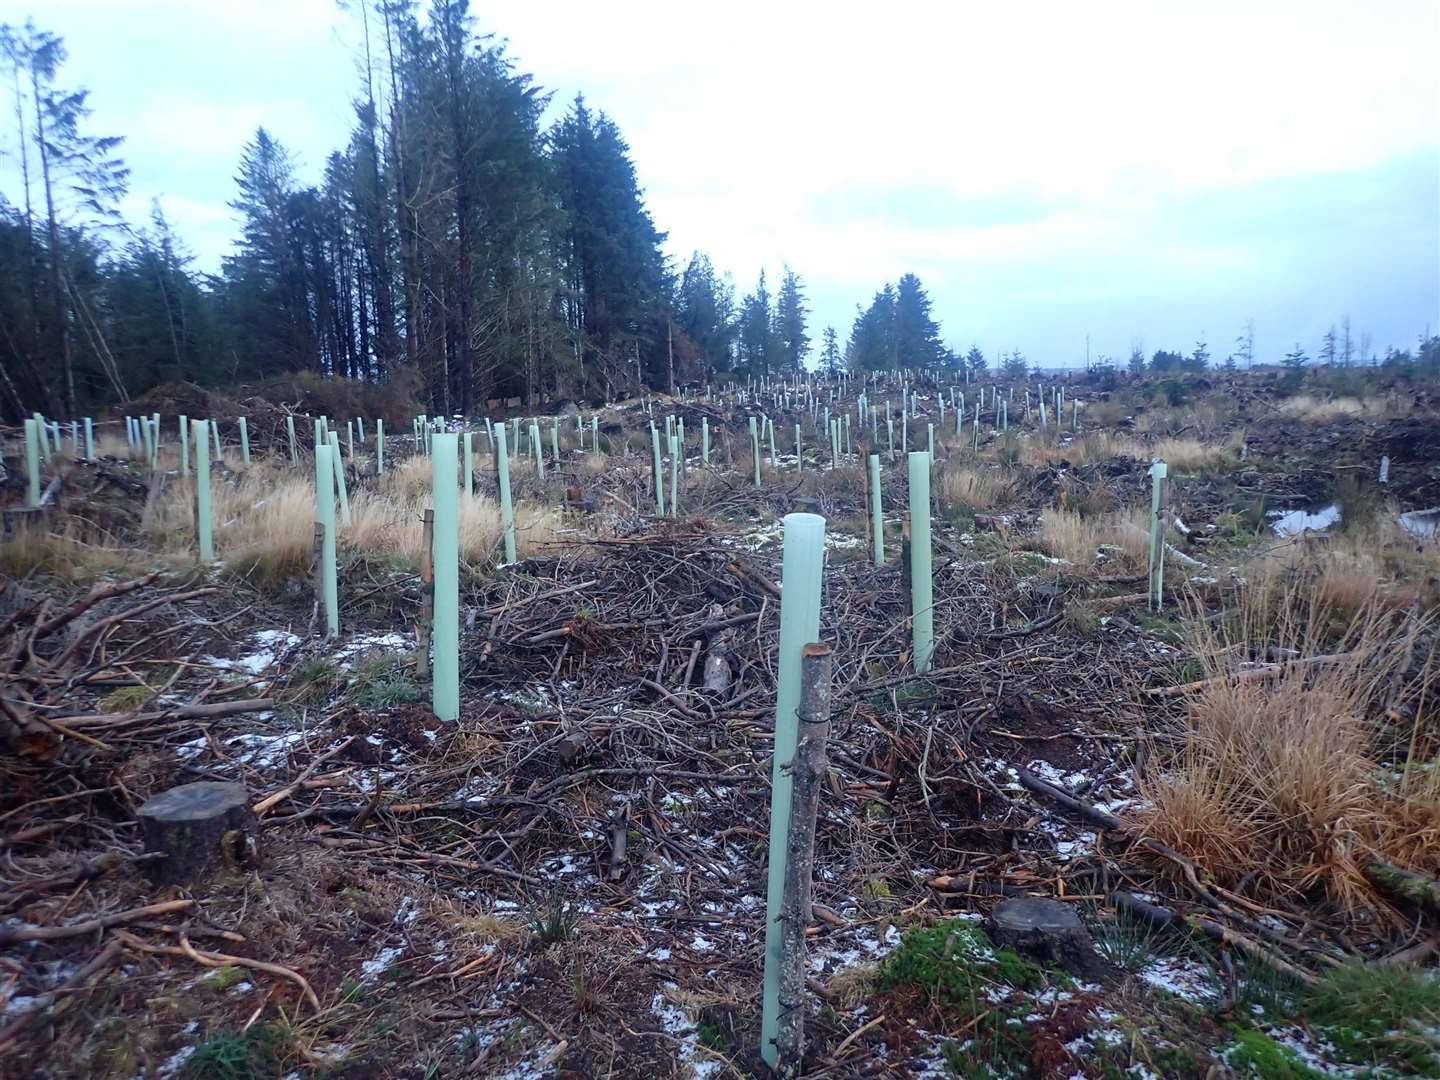 Still around 400 trees left to plant in the woodland.